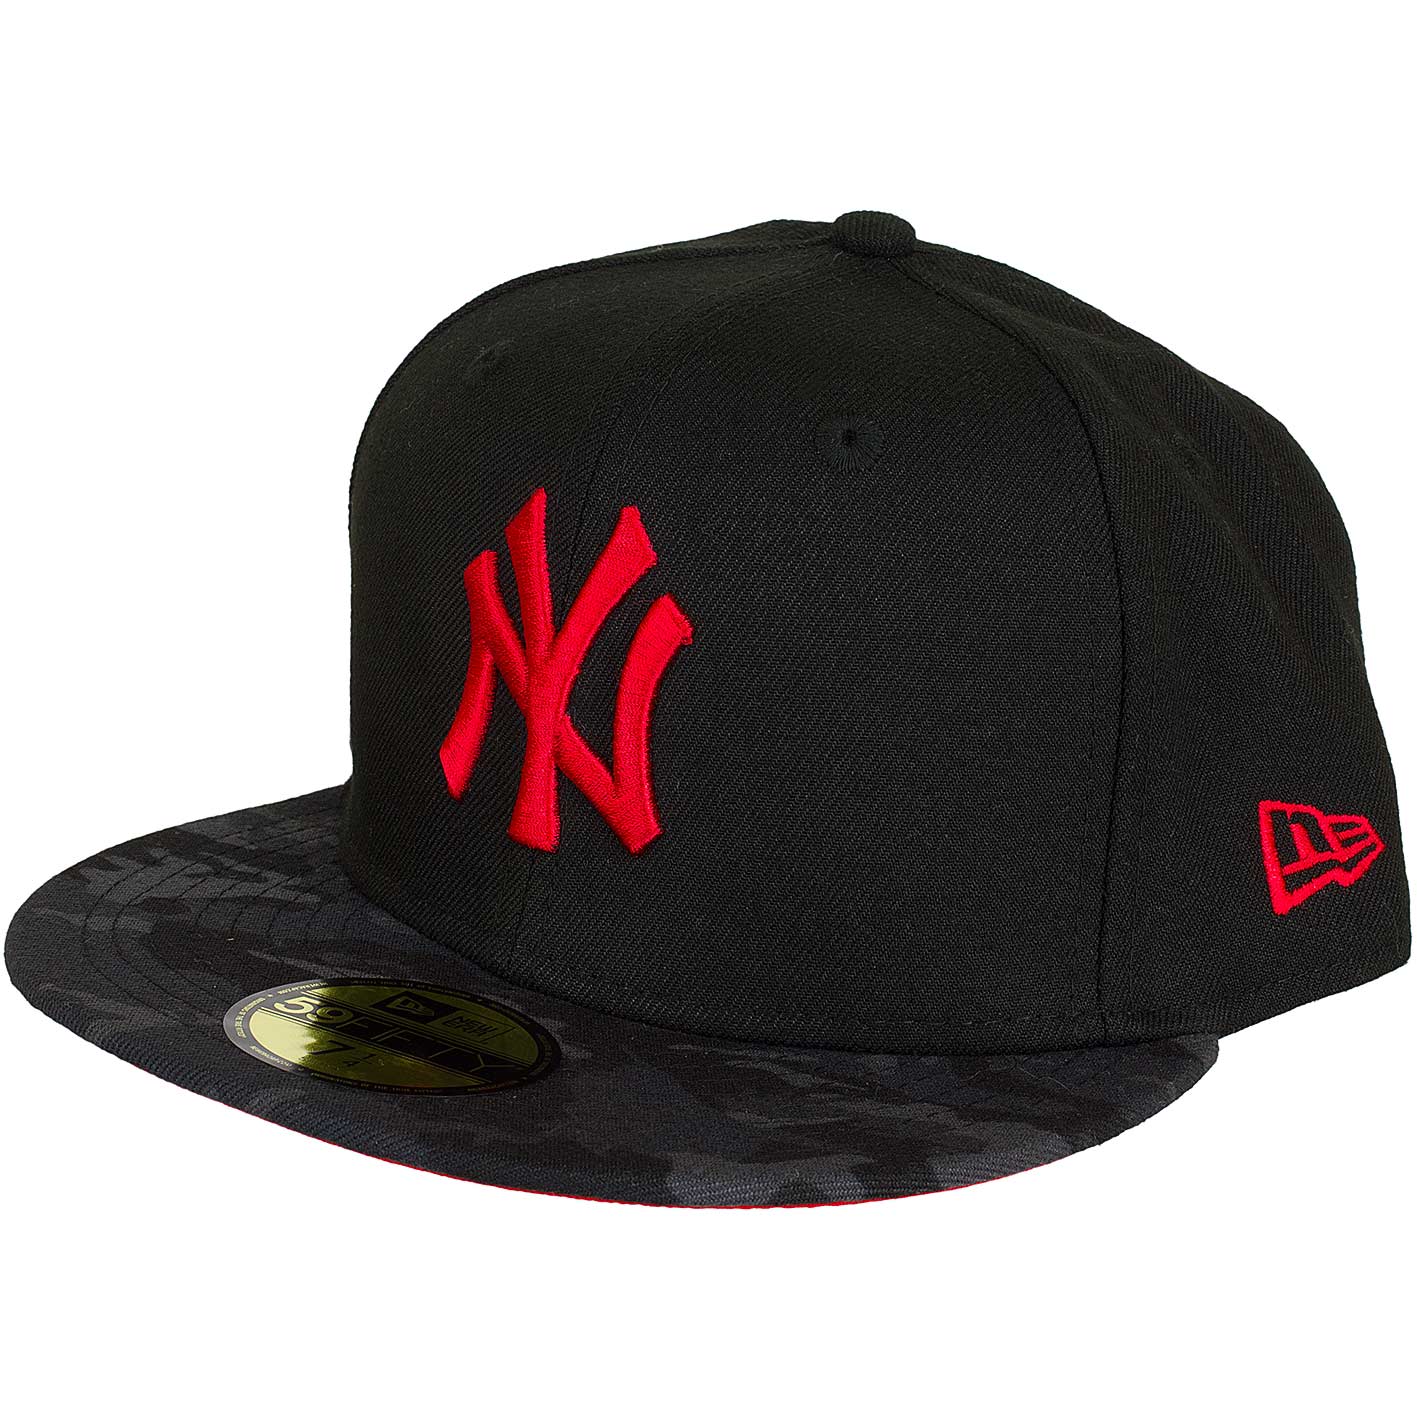 ☆ New 59Fifty Fitted Cap Contrast Camo NY Yankees schwarz/camo/rot - hier bestellen!